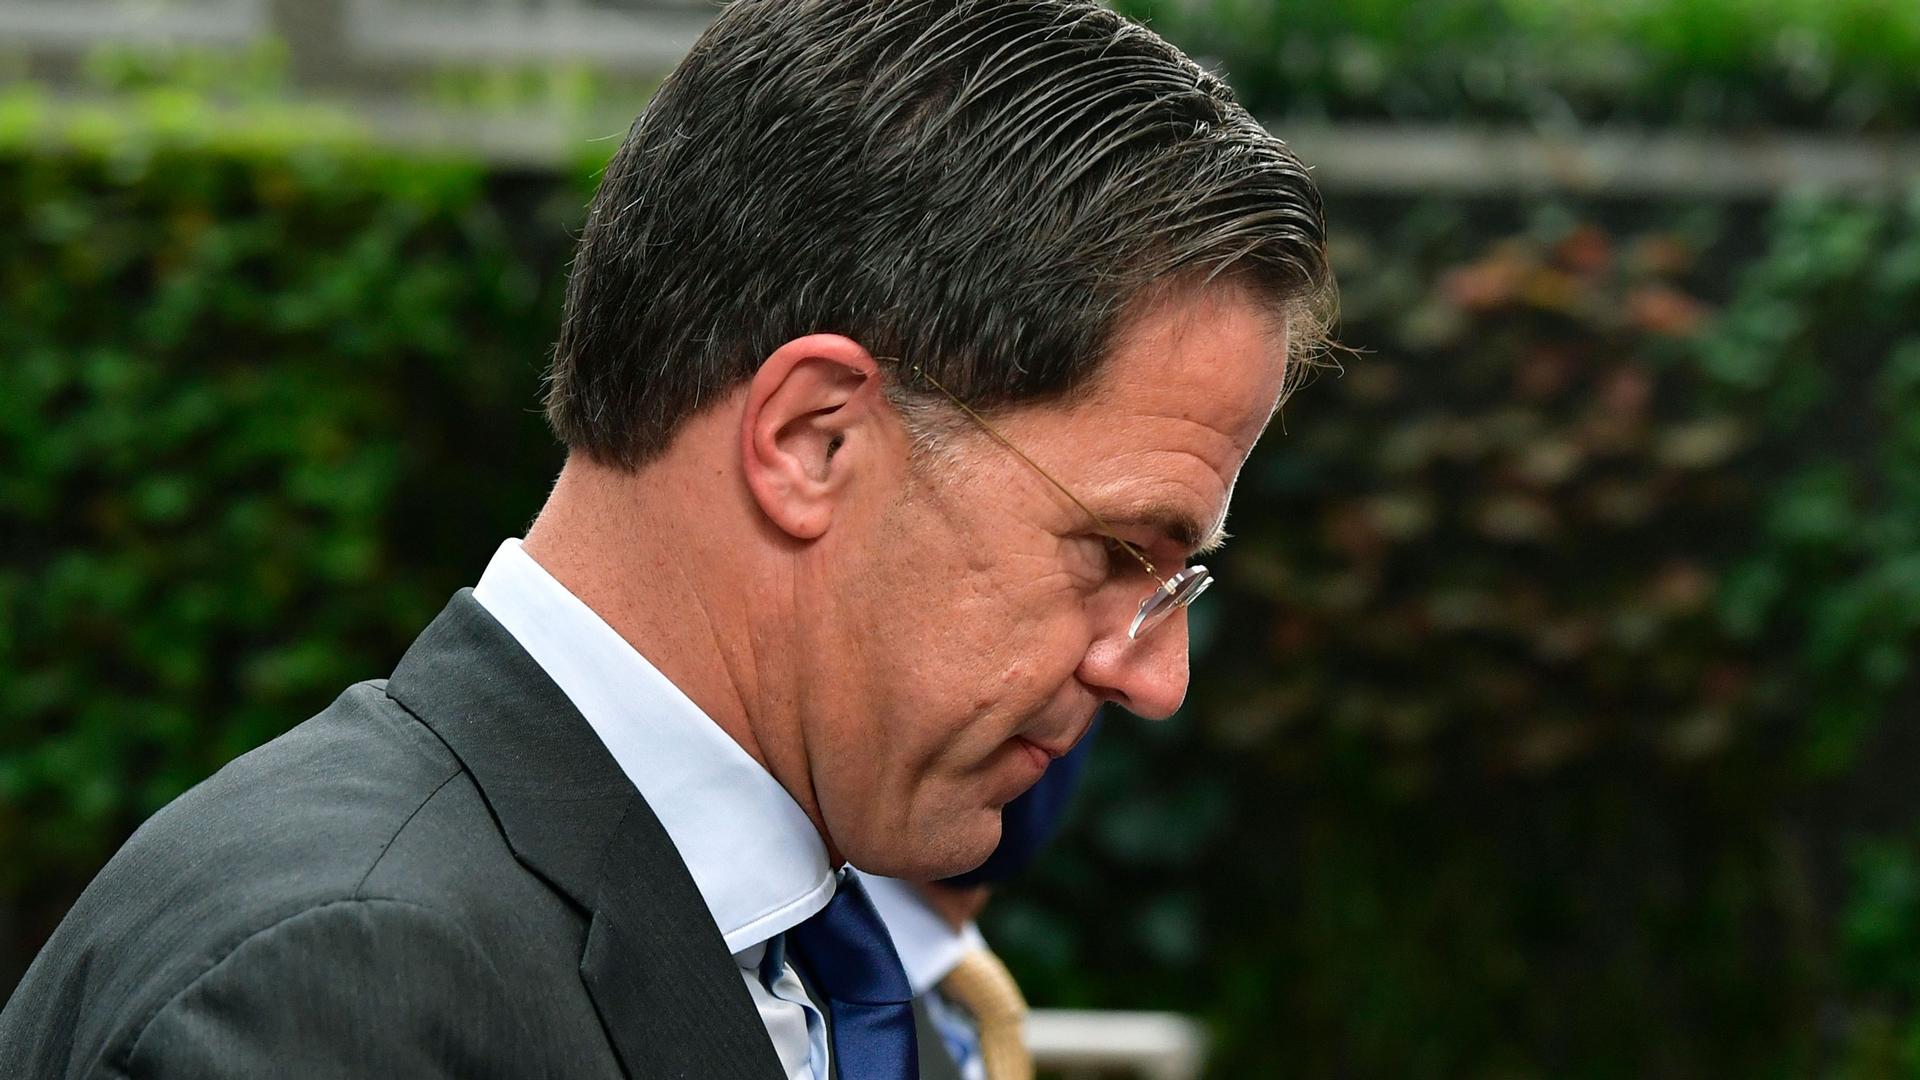 Netherlands' Prime Minister Mark Rutte is shown in a close-up photograph wearing a gray suit and looking down.